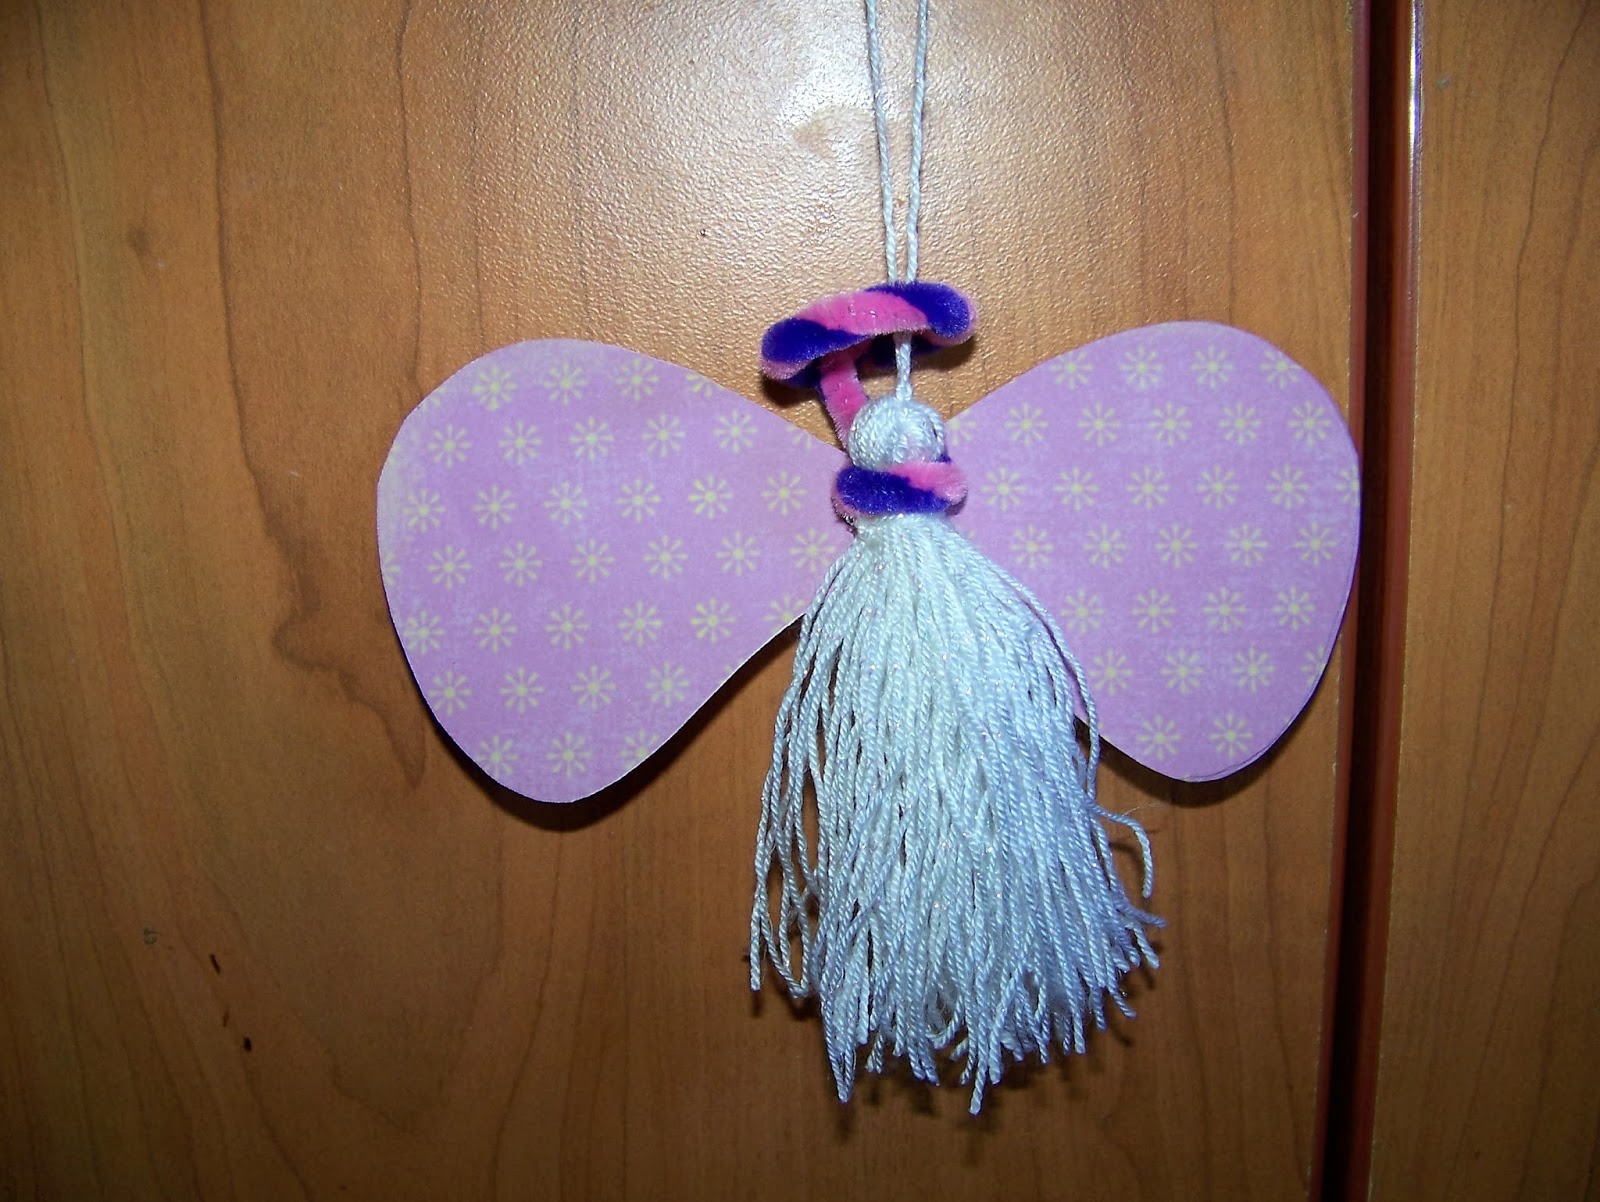 A Pretty Talent Blog: Make Tassel Angels For Your Tree